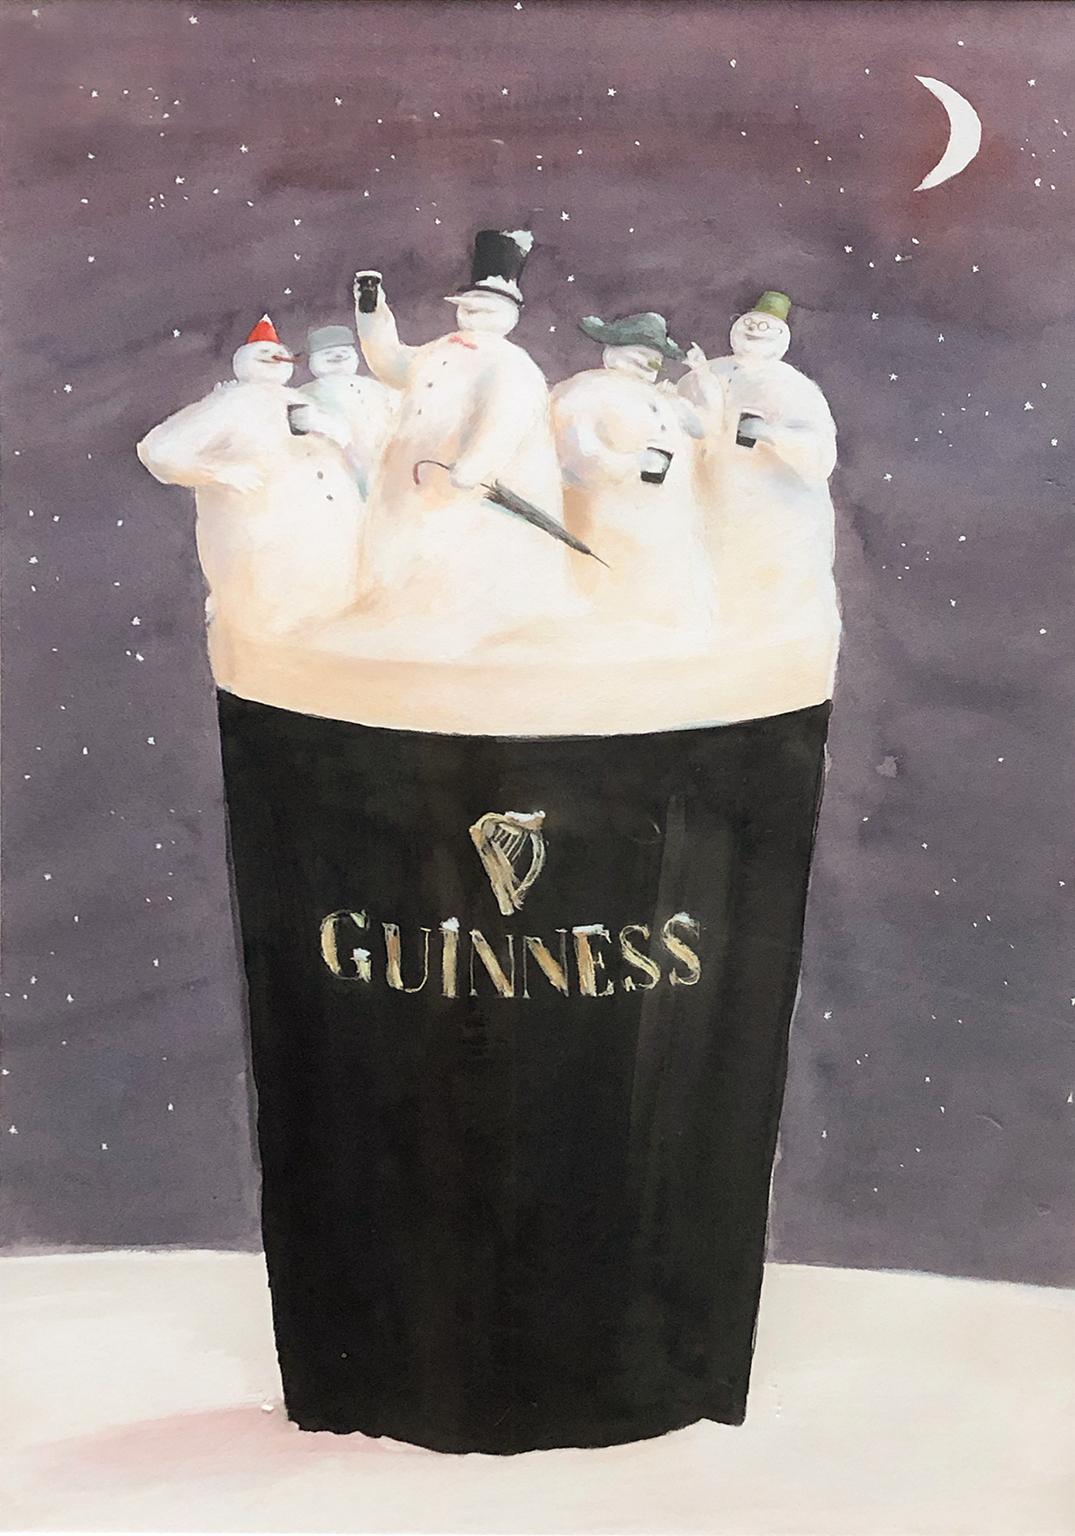 This is a rare original piece of commercial illustration for a Guinness advertisement by British artist Michael O'Shaughnessy. Circa 1980s we do not know if this was a published illustration or not, the item is unsigned.

Michael O'Shaughnessy is a